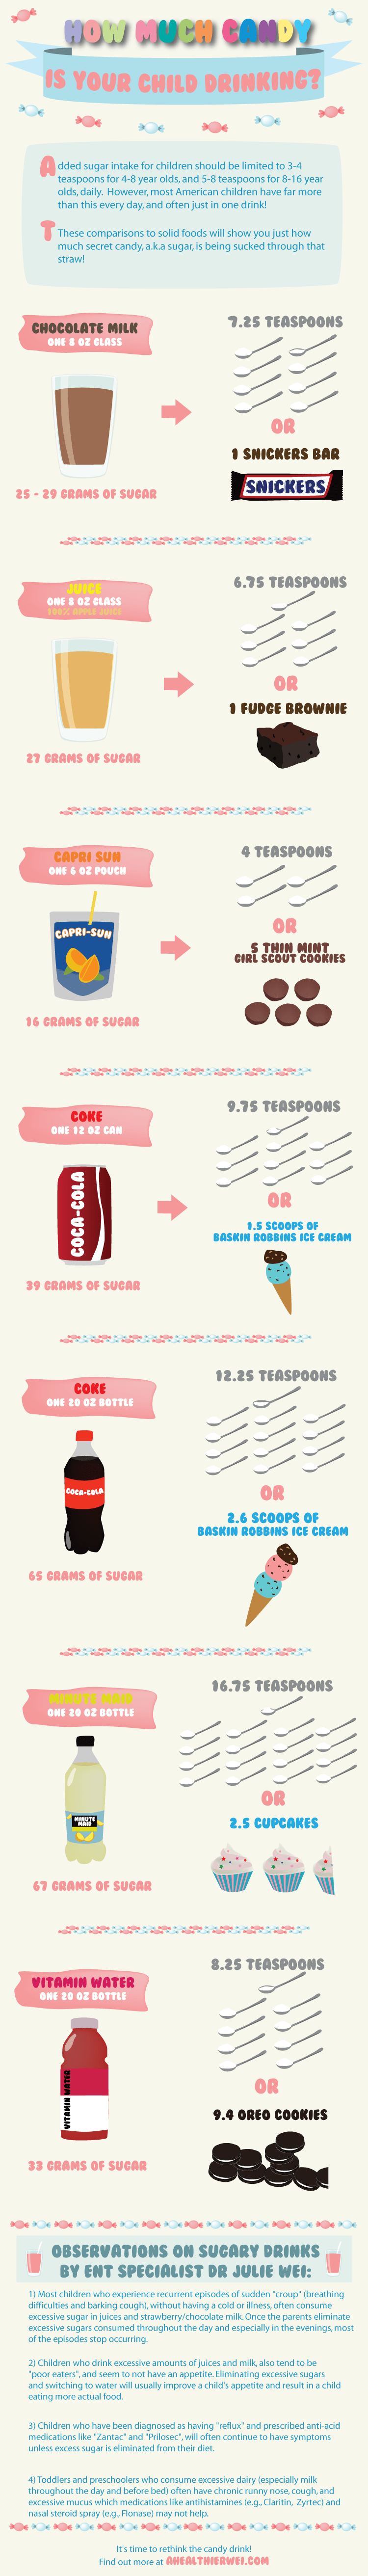 How Much Candy Is Your Child Drinking? (Infographic)